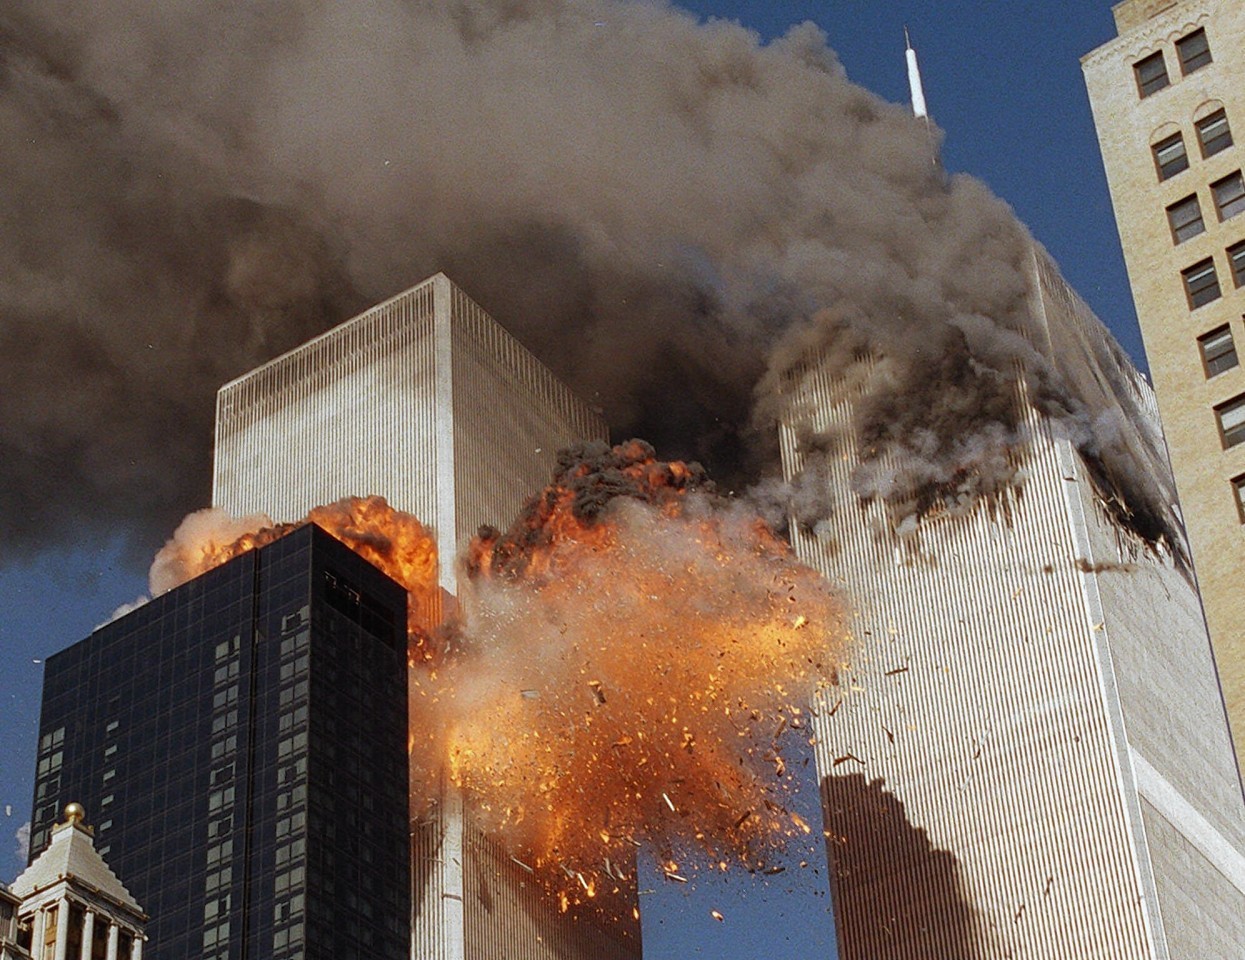 Catastrophic events like 9/11 highlight the unpredictability of stock markets